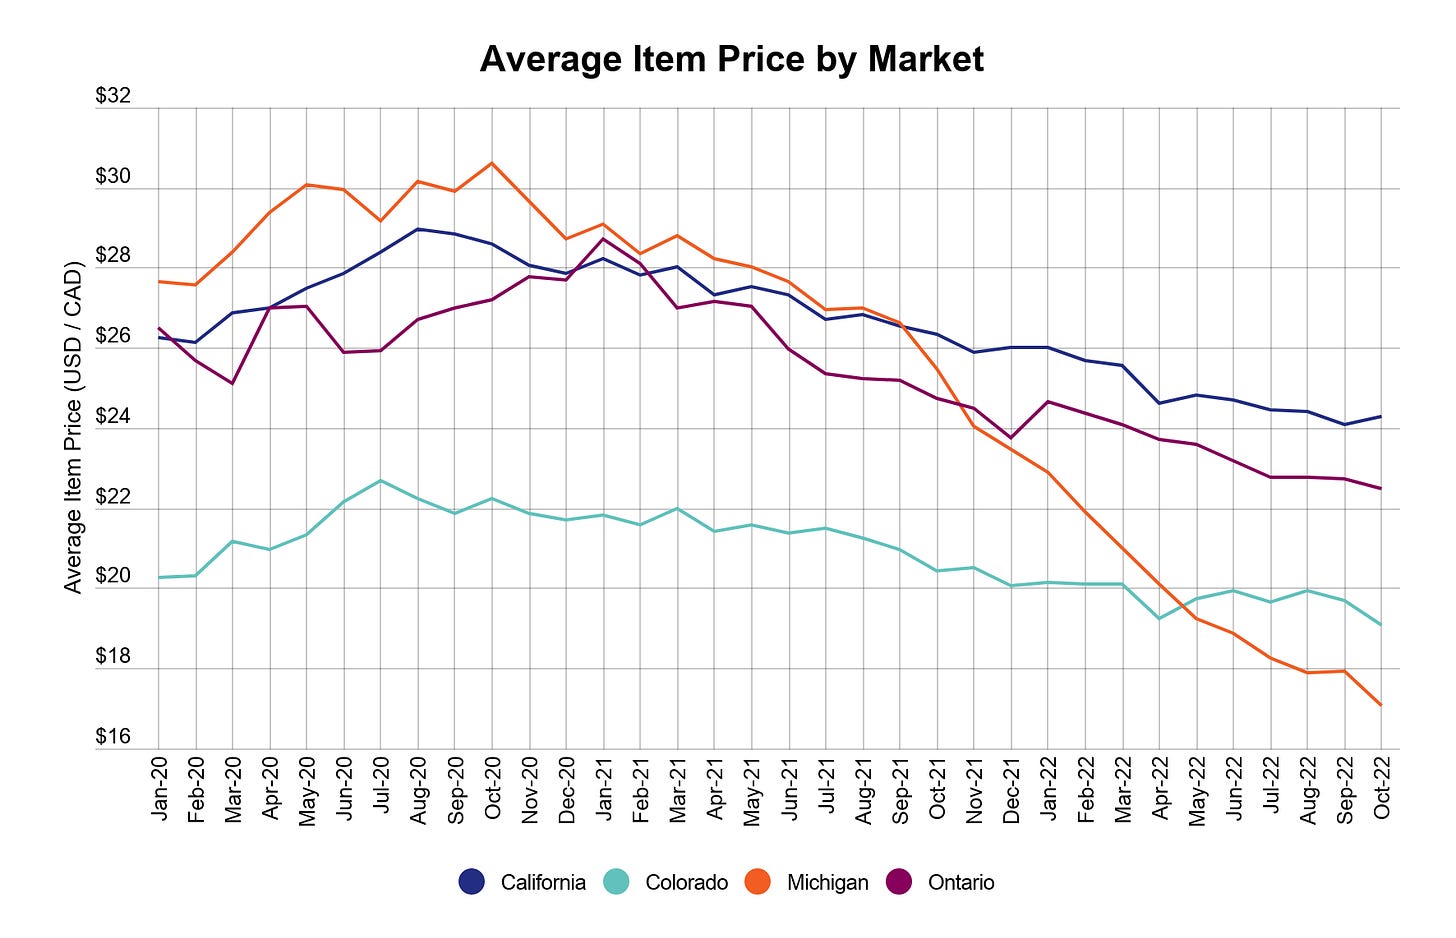 Cannabis pricing compression in the US & Canada image 1: Average item price of cannabis by market